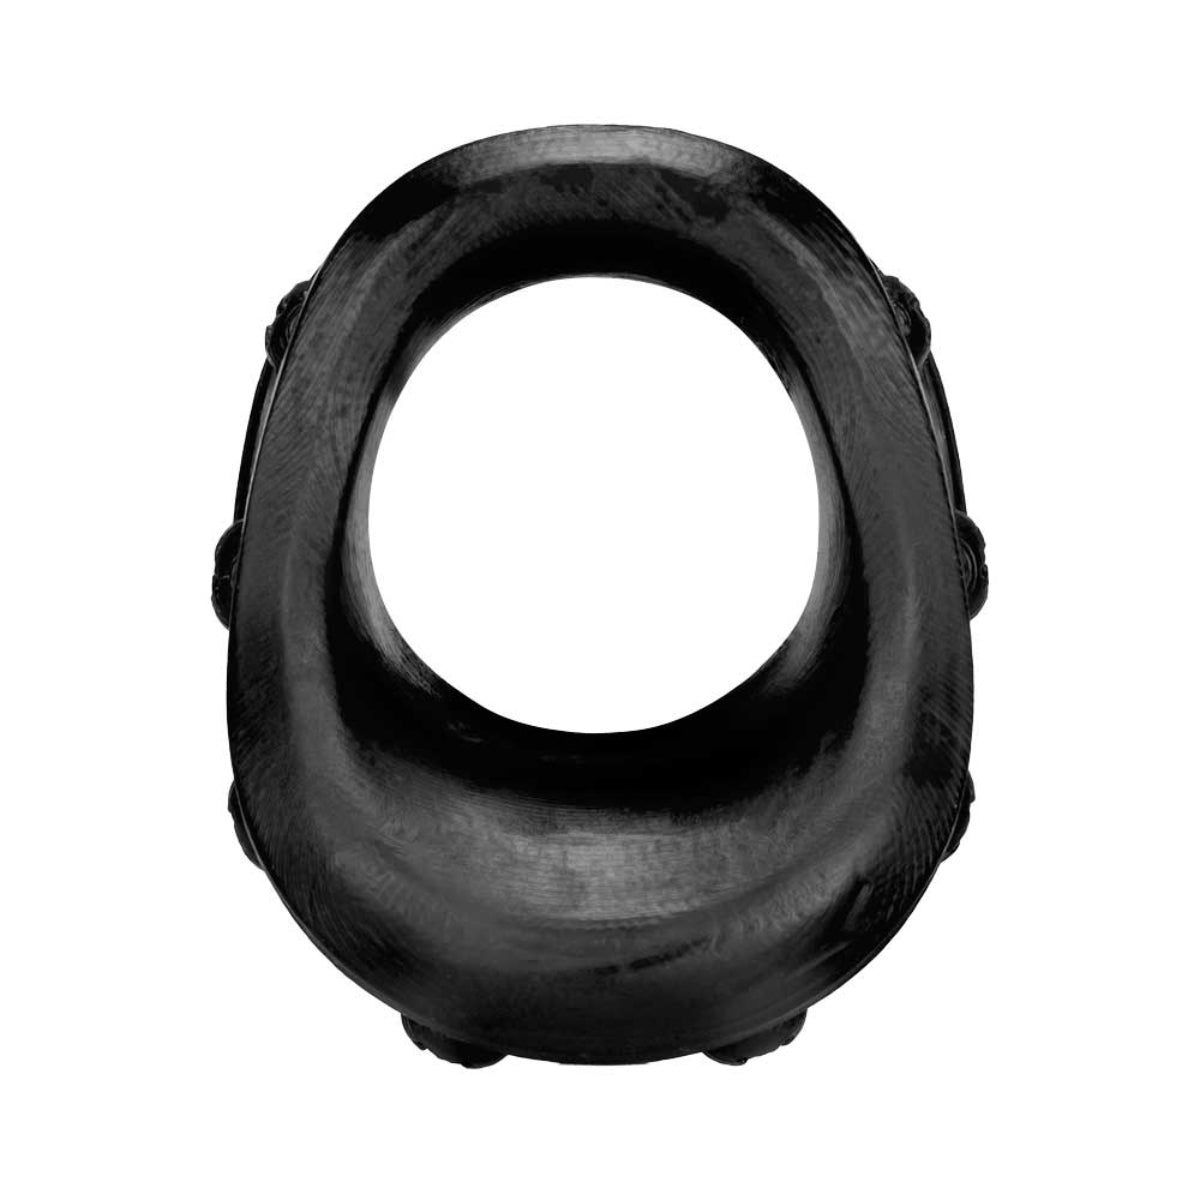 Prowler RED By Oxballs PLOW Cock Ring Black - Simply Pleasure